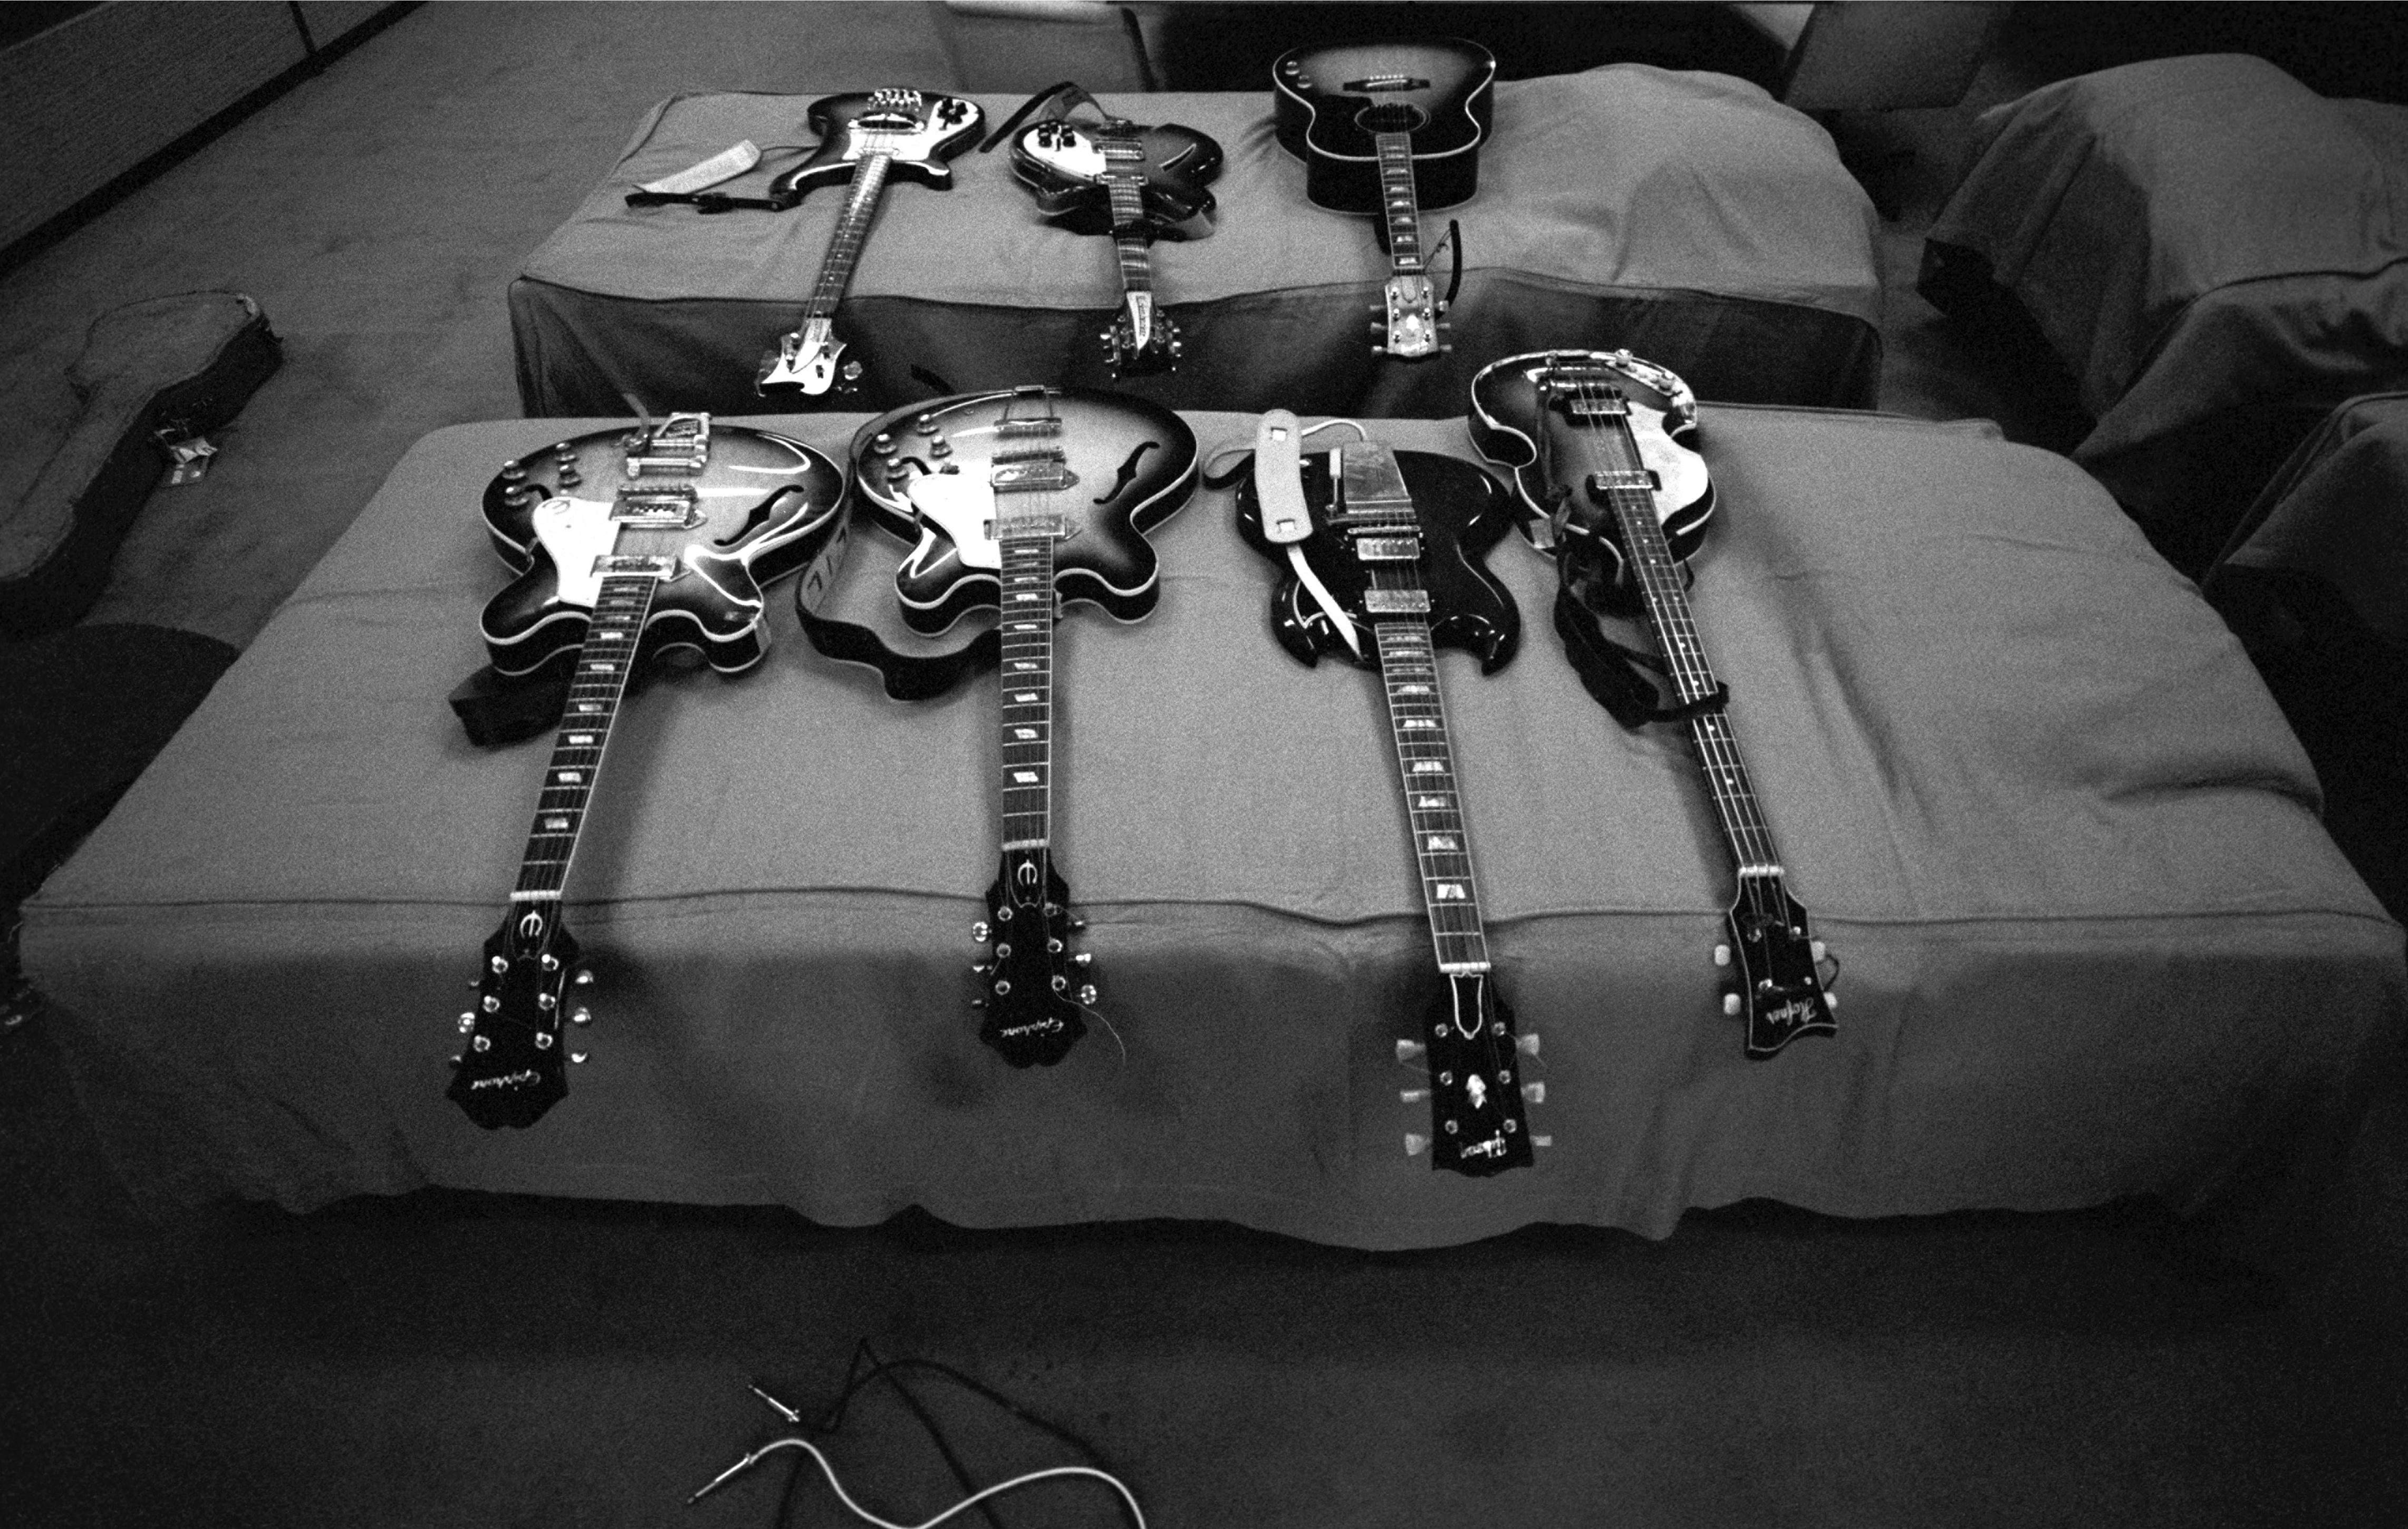  The Beatles Guitars, backstage in Tokyo Japan in 1966 by Robert Whitaker. 

All limited edition prints in this collection are hand numbered and authenticated with the official Robert Whitaker Estate Stamp. Available in two limited edition